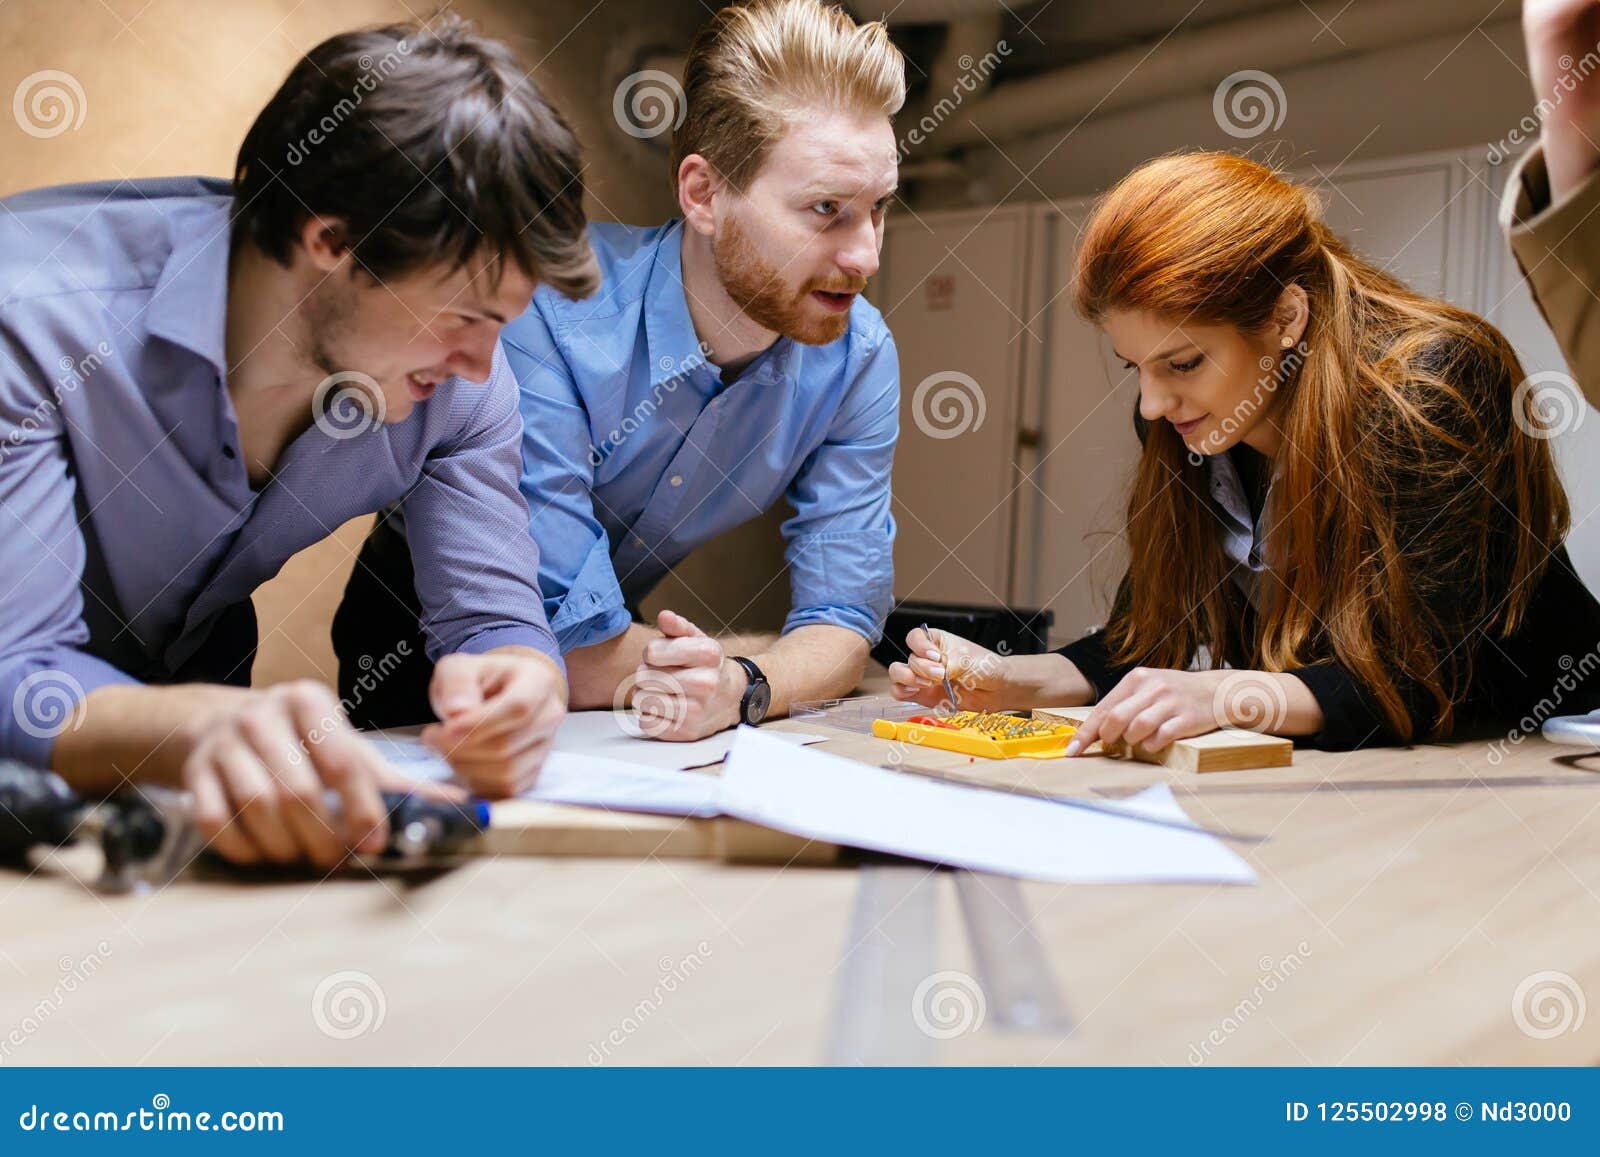 Group of Designers Working on a Project Stock Photo - Image of ...